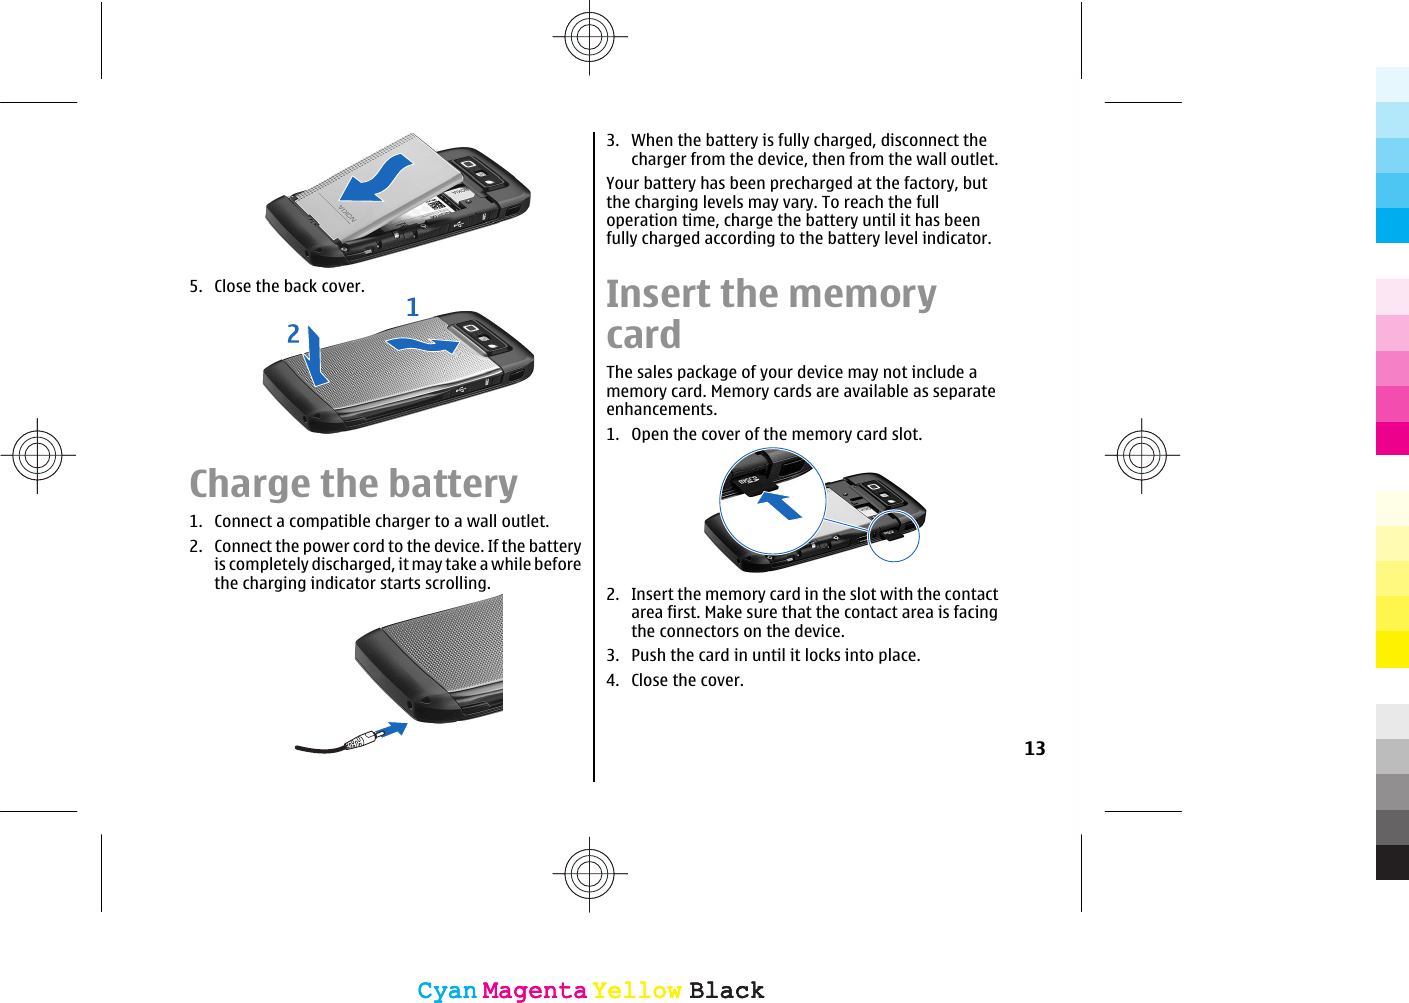 5. Close the back cover.Charge the battery1. Connect a compatible charger to a wall outlet.2. Connect the power cord to the device. If the batteryis completely discharged, it may take a while beforethe charging indicator starts scrolling.3. When the battery is fully charged, disconnect thecharger from the device, then from the wall outlet.Your battery has been precharged at the factory, butthe charging levels may vary. To reach the fulloperation time, charge the battery until it has beenfully charged according to the battery level indicator.Insert the memorycardThe sales package of your device may not include amemory card. Memory cards are available as separateenhancements.1. Open the cover of the memory card slot.2. Insert the memory card in the slot with the contactarea first. Make sure that the contact area is facingthe connectors on the device.3. Push the card in until it locks into place.4. Close the cover.13CyanCyanMagentaMagentaYellowYellowBlackBlackCyanCyanMagentaMagentaYellowYellowBlackBlack